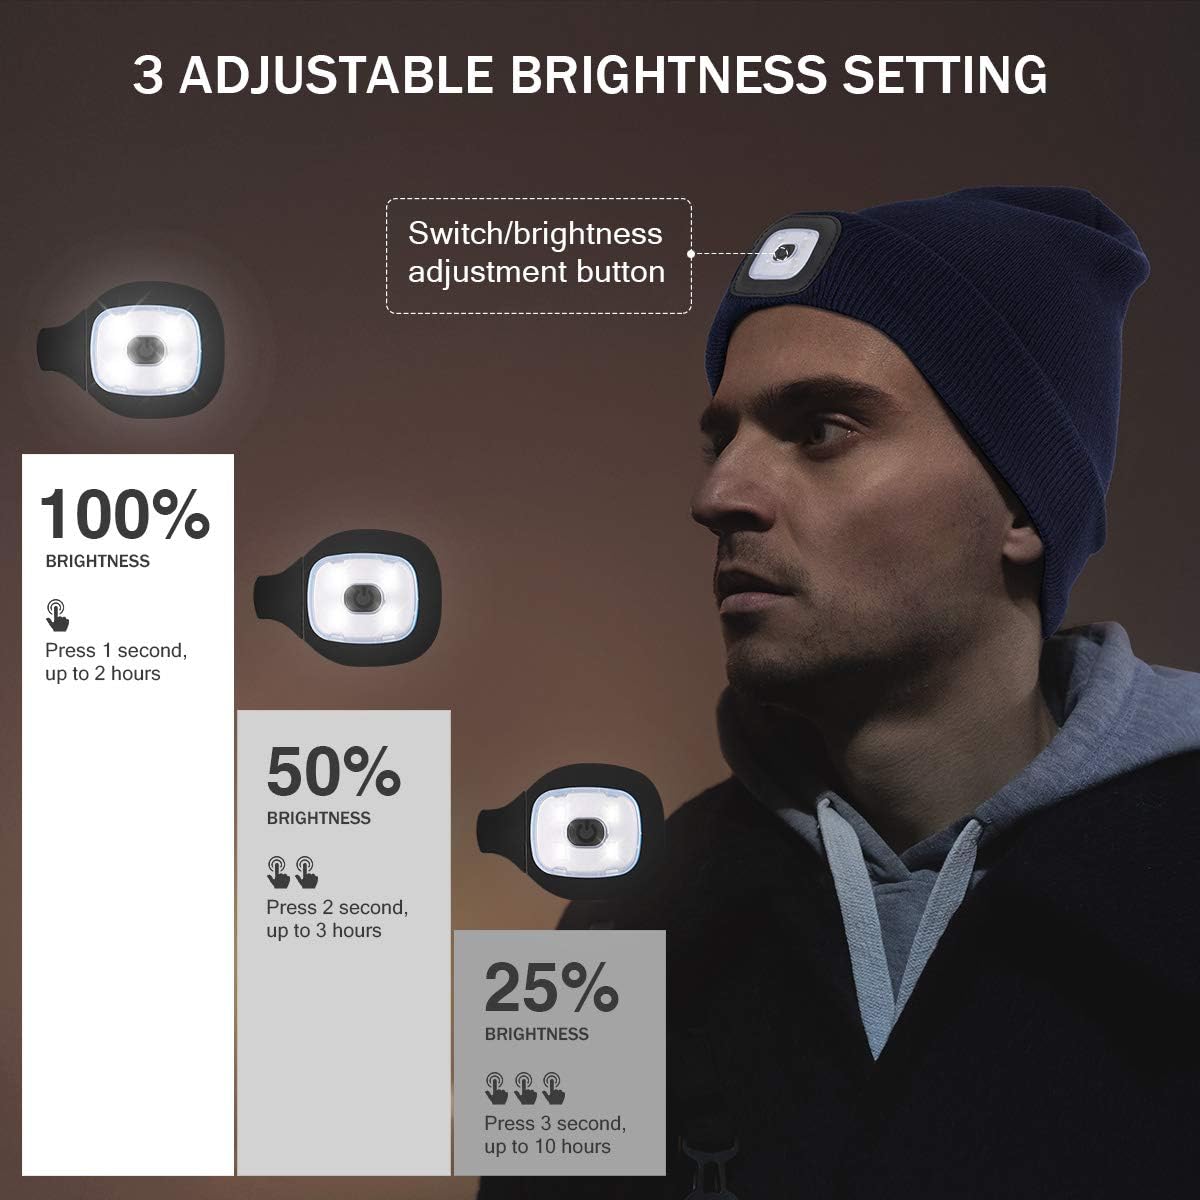 LED Knitted Winter Beanie Hat